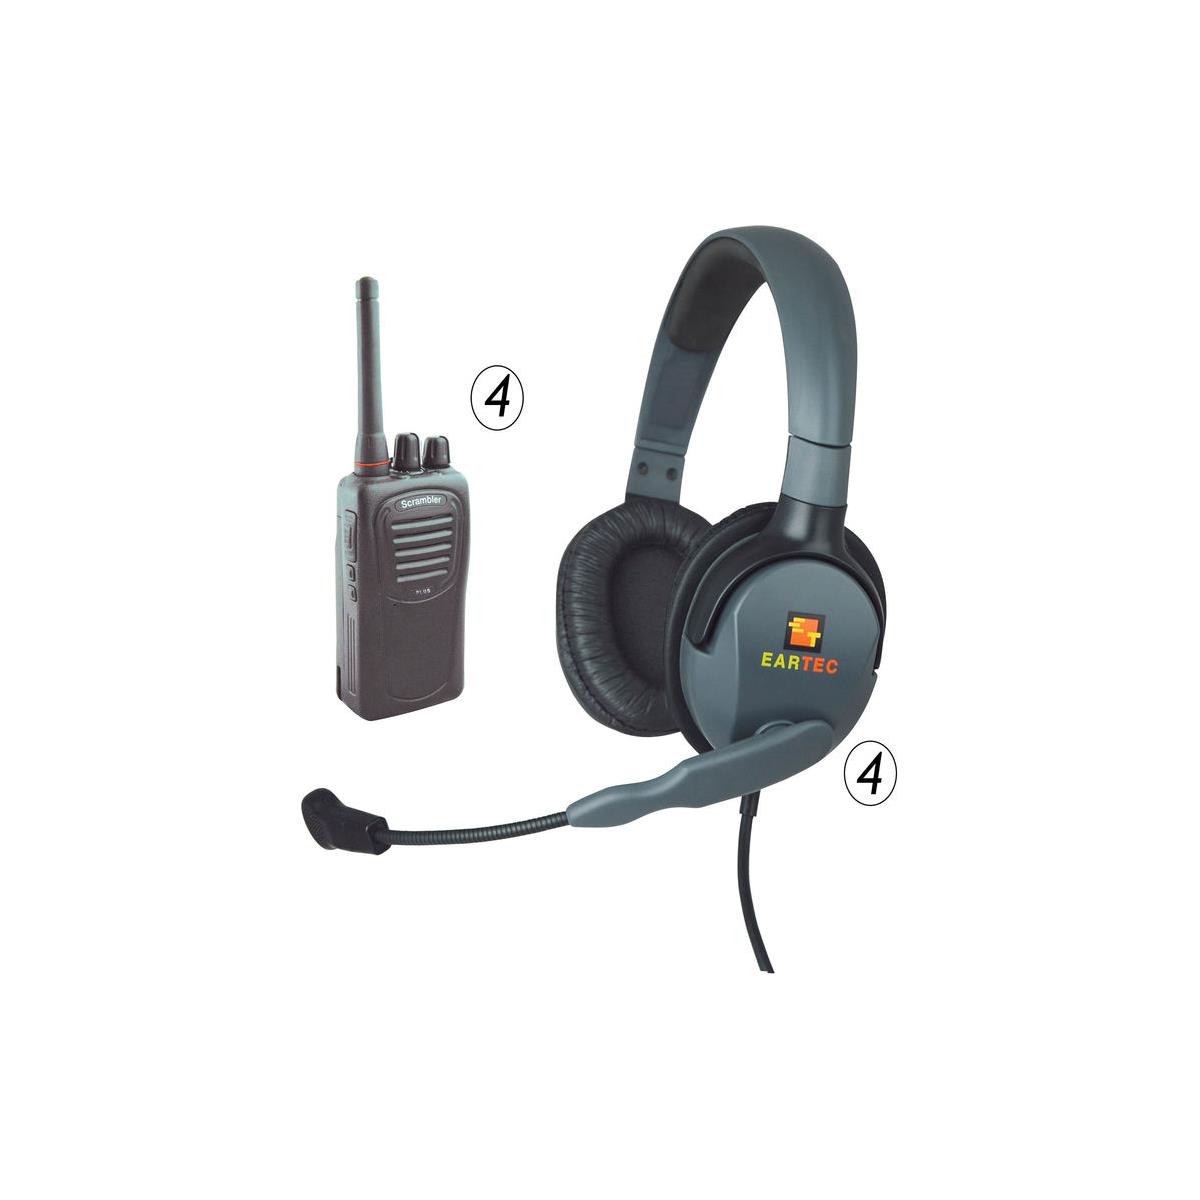 Image of Eartec Scrambler SC-1000 4-User Two-Way Radio System with Max 4G Double Headset